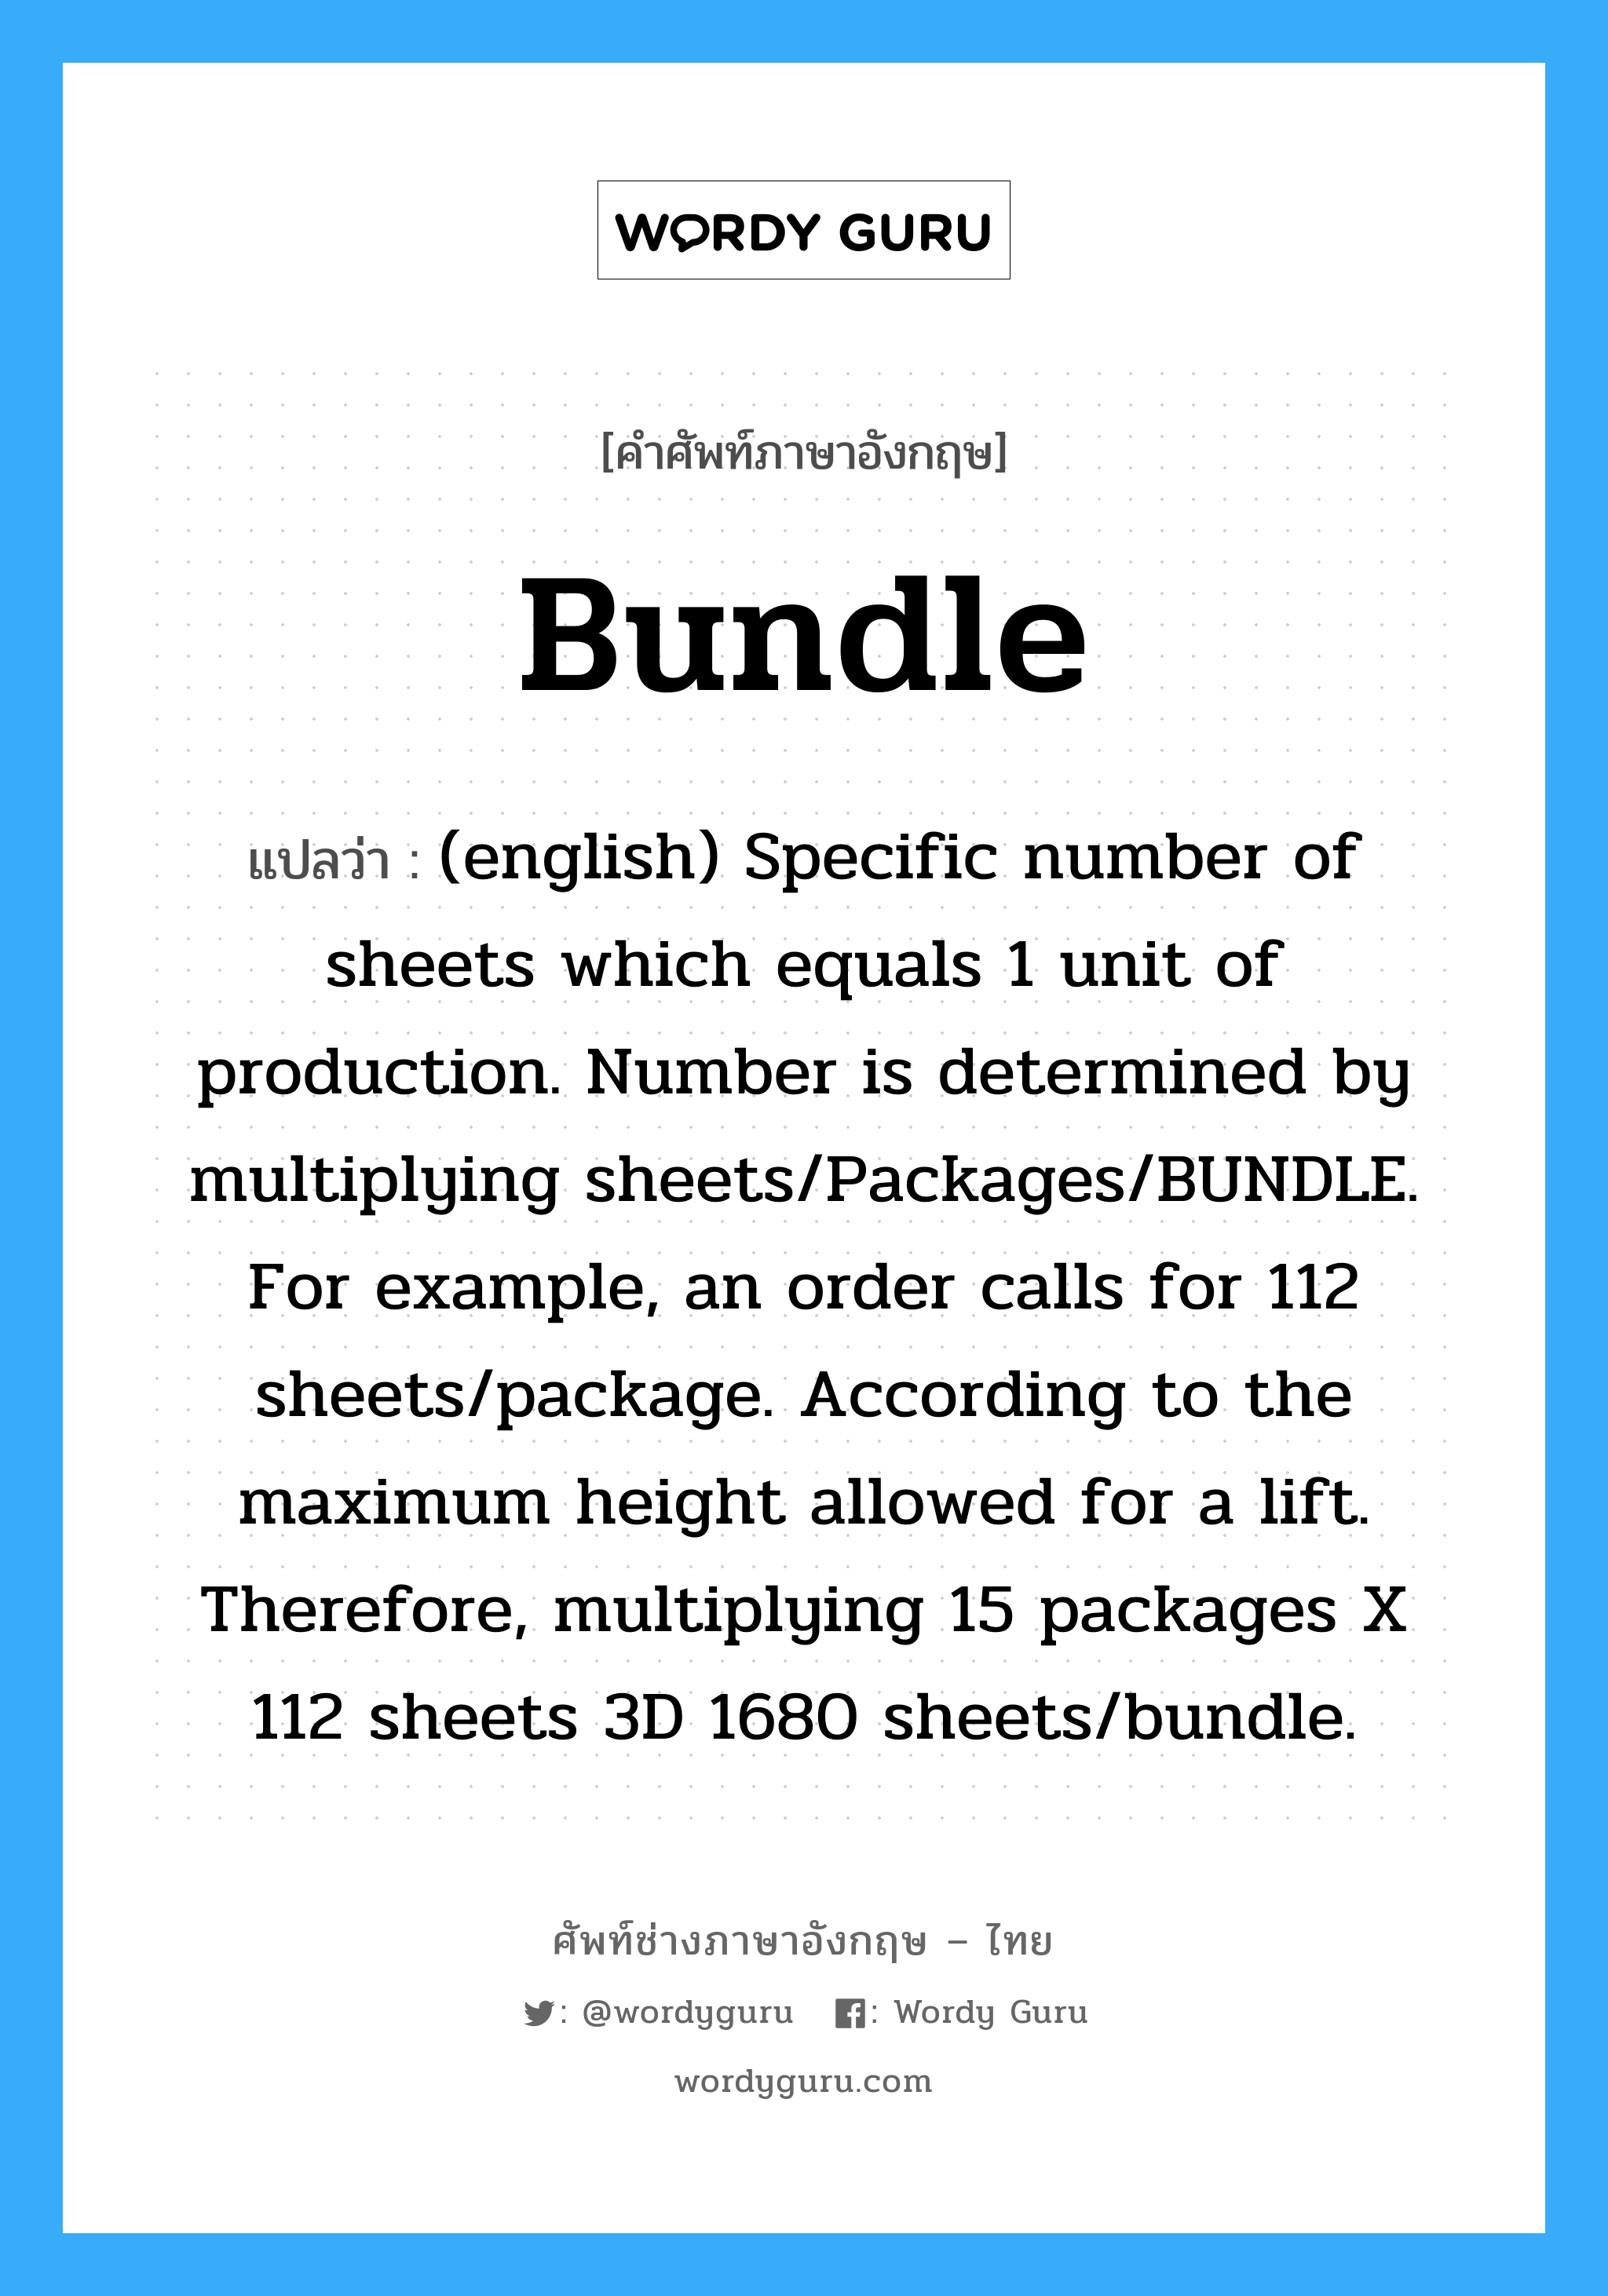 (english) Specific number of sheets which equals 1 unit of production. Number is determined by multiplying sheets/Packages/BUNDLE. For example, an order calls for 112 sheets/package. According to the maximum height allowed for a lift. Therefore, multiplying 15 packages X 112 sheets 3D 1680 sheets/bundle. ภาษาอังกฤษ?, คำศัพท์ช่างภาษาอังกฤษ - ไทย (english) Specific number of sheets which equals 1 unit of production. Number is determined by multiplying sheets/Packages/BUNDLE. For example, an order calls for 112 sheets/package. According to the maximum height allowed for a lift. Therefore, multiplying 15 packages X 112 sheets 3D 1680 sheets/bundle. คำศัพท์ภาษาอังกฤษ (english) Specific number of sheets which equals 1 unit of production. Number is determined by multiplying sheets/Packages/BUNDLE. For example, an order calls for 112 sheets/package. According to the maximum height allowed for a lift. Therefore, multiplying 15 packages X 112 sheets 3D 1680 sheets/bundle. แปลว่า Bundle